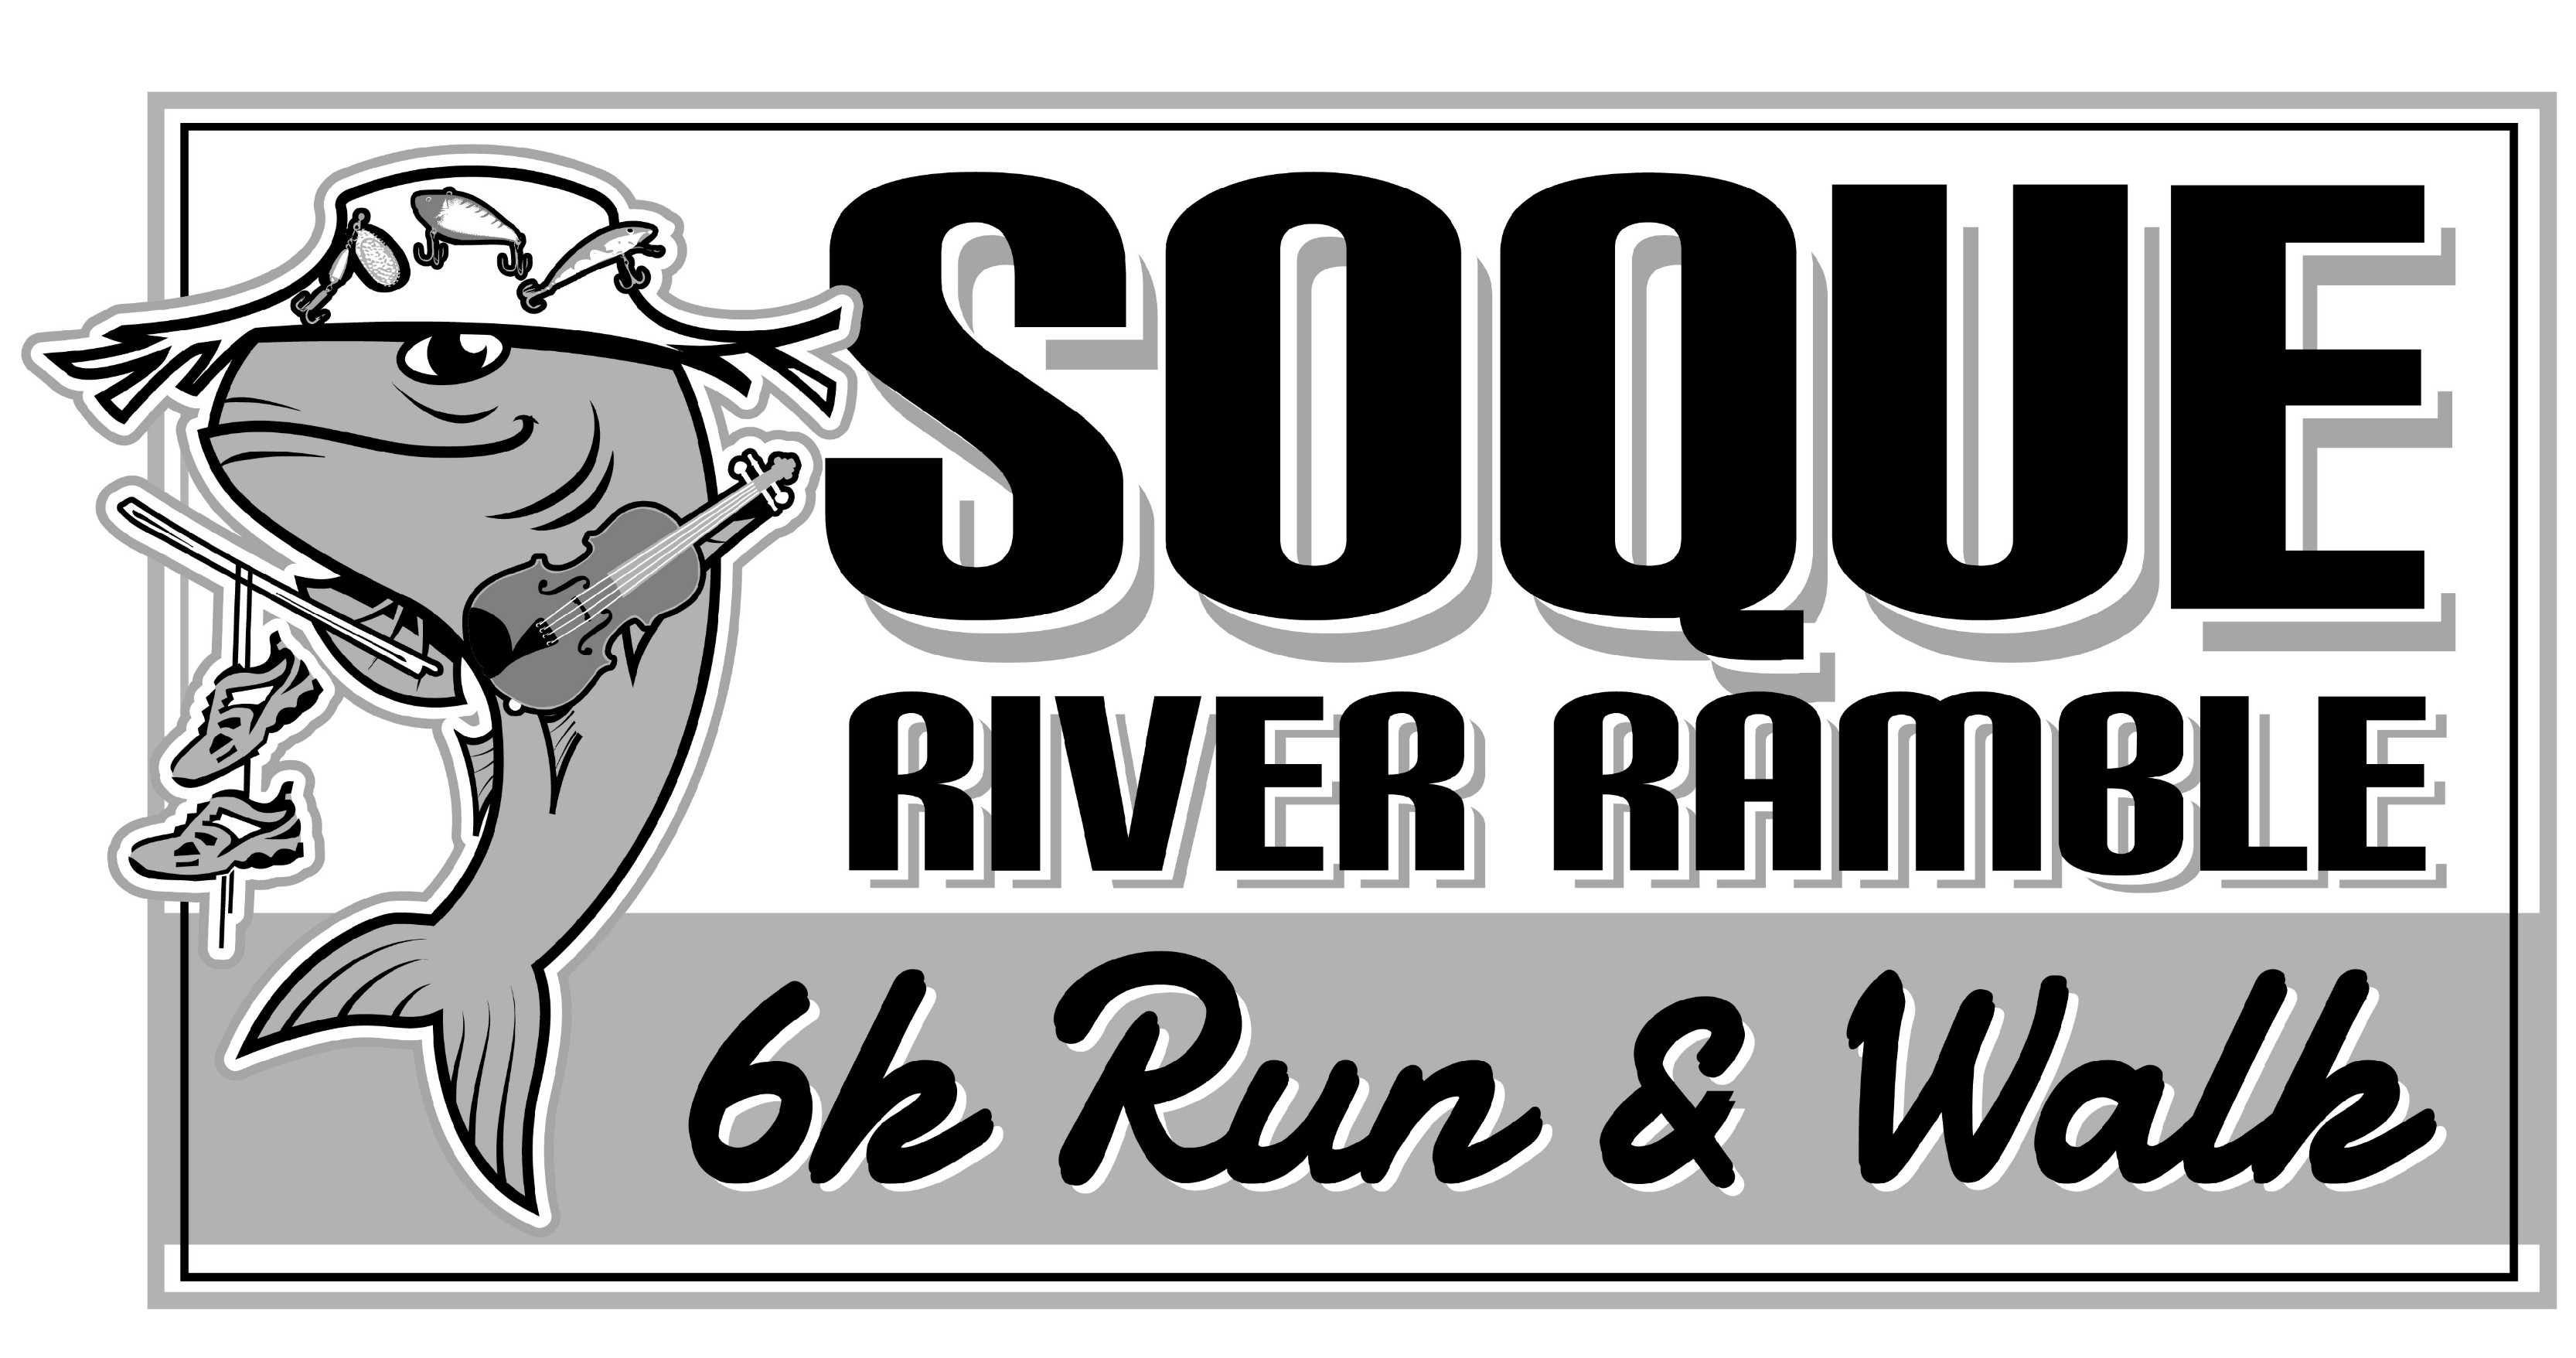 2013 Soque River Ramble Event Graphic - First Look!